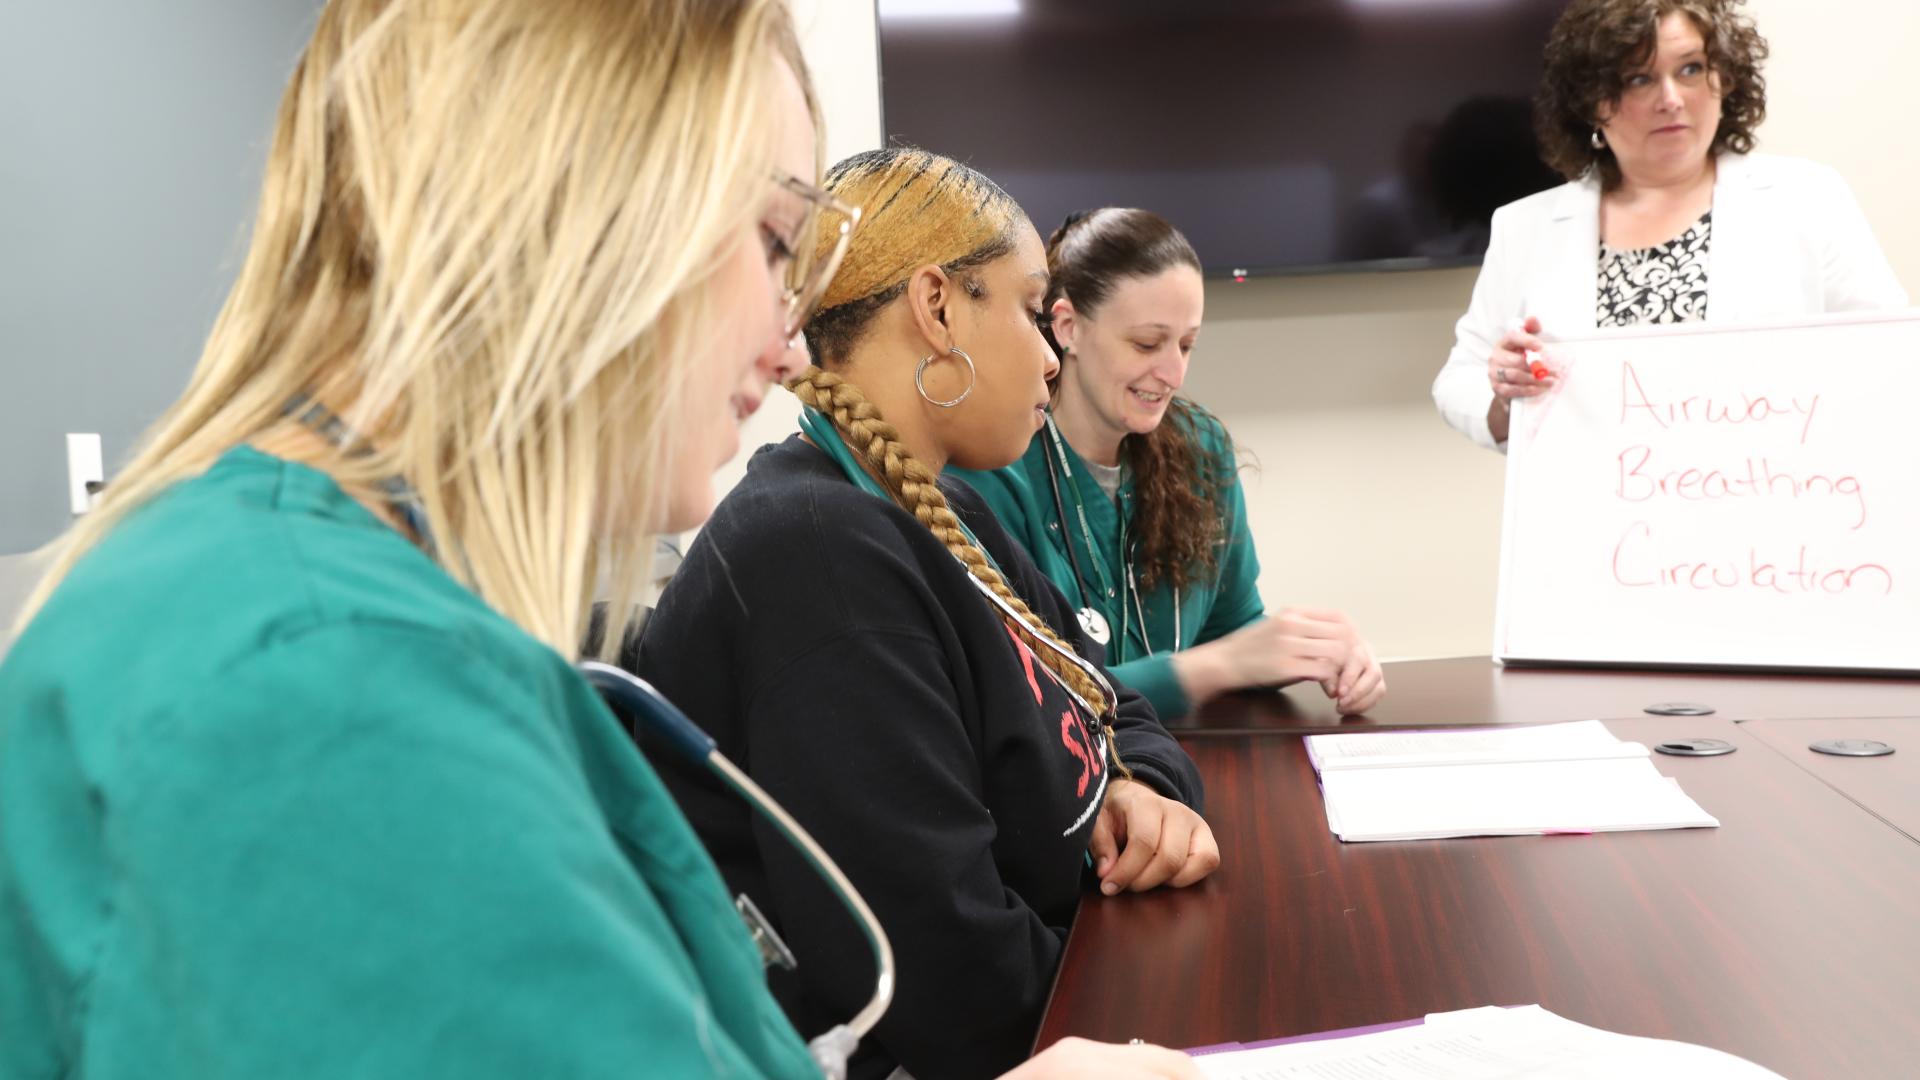 Nursing students and professor working at a classroom table.